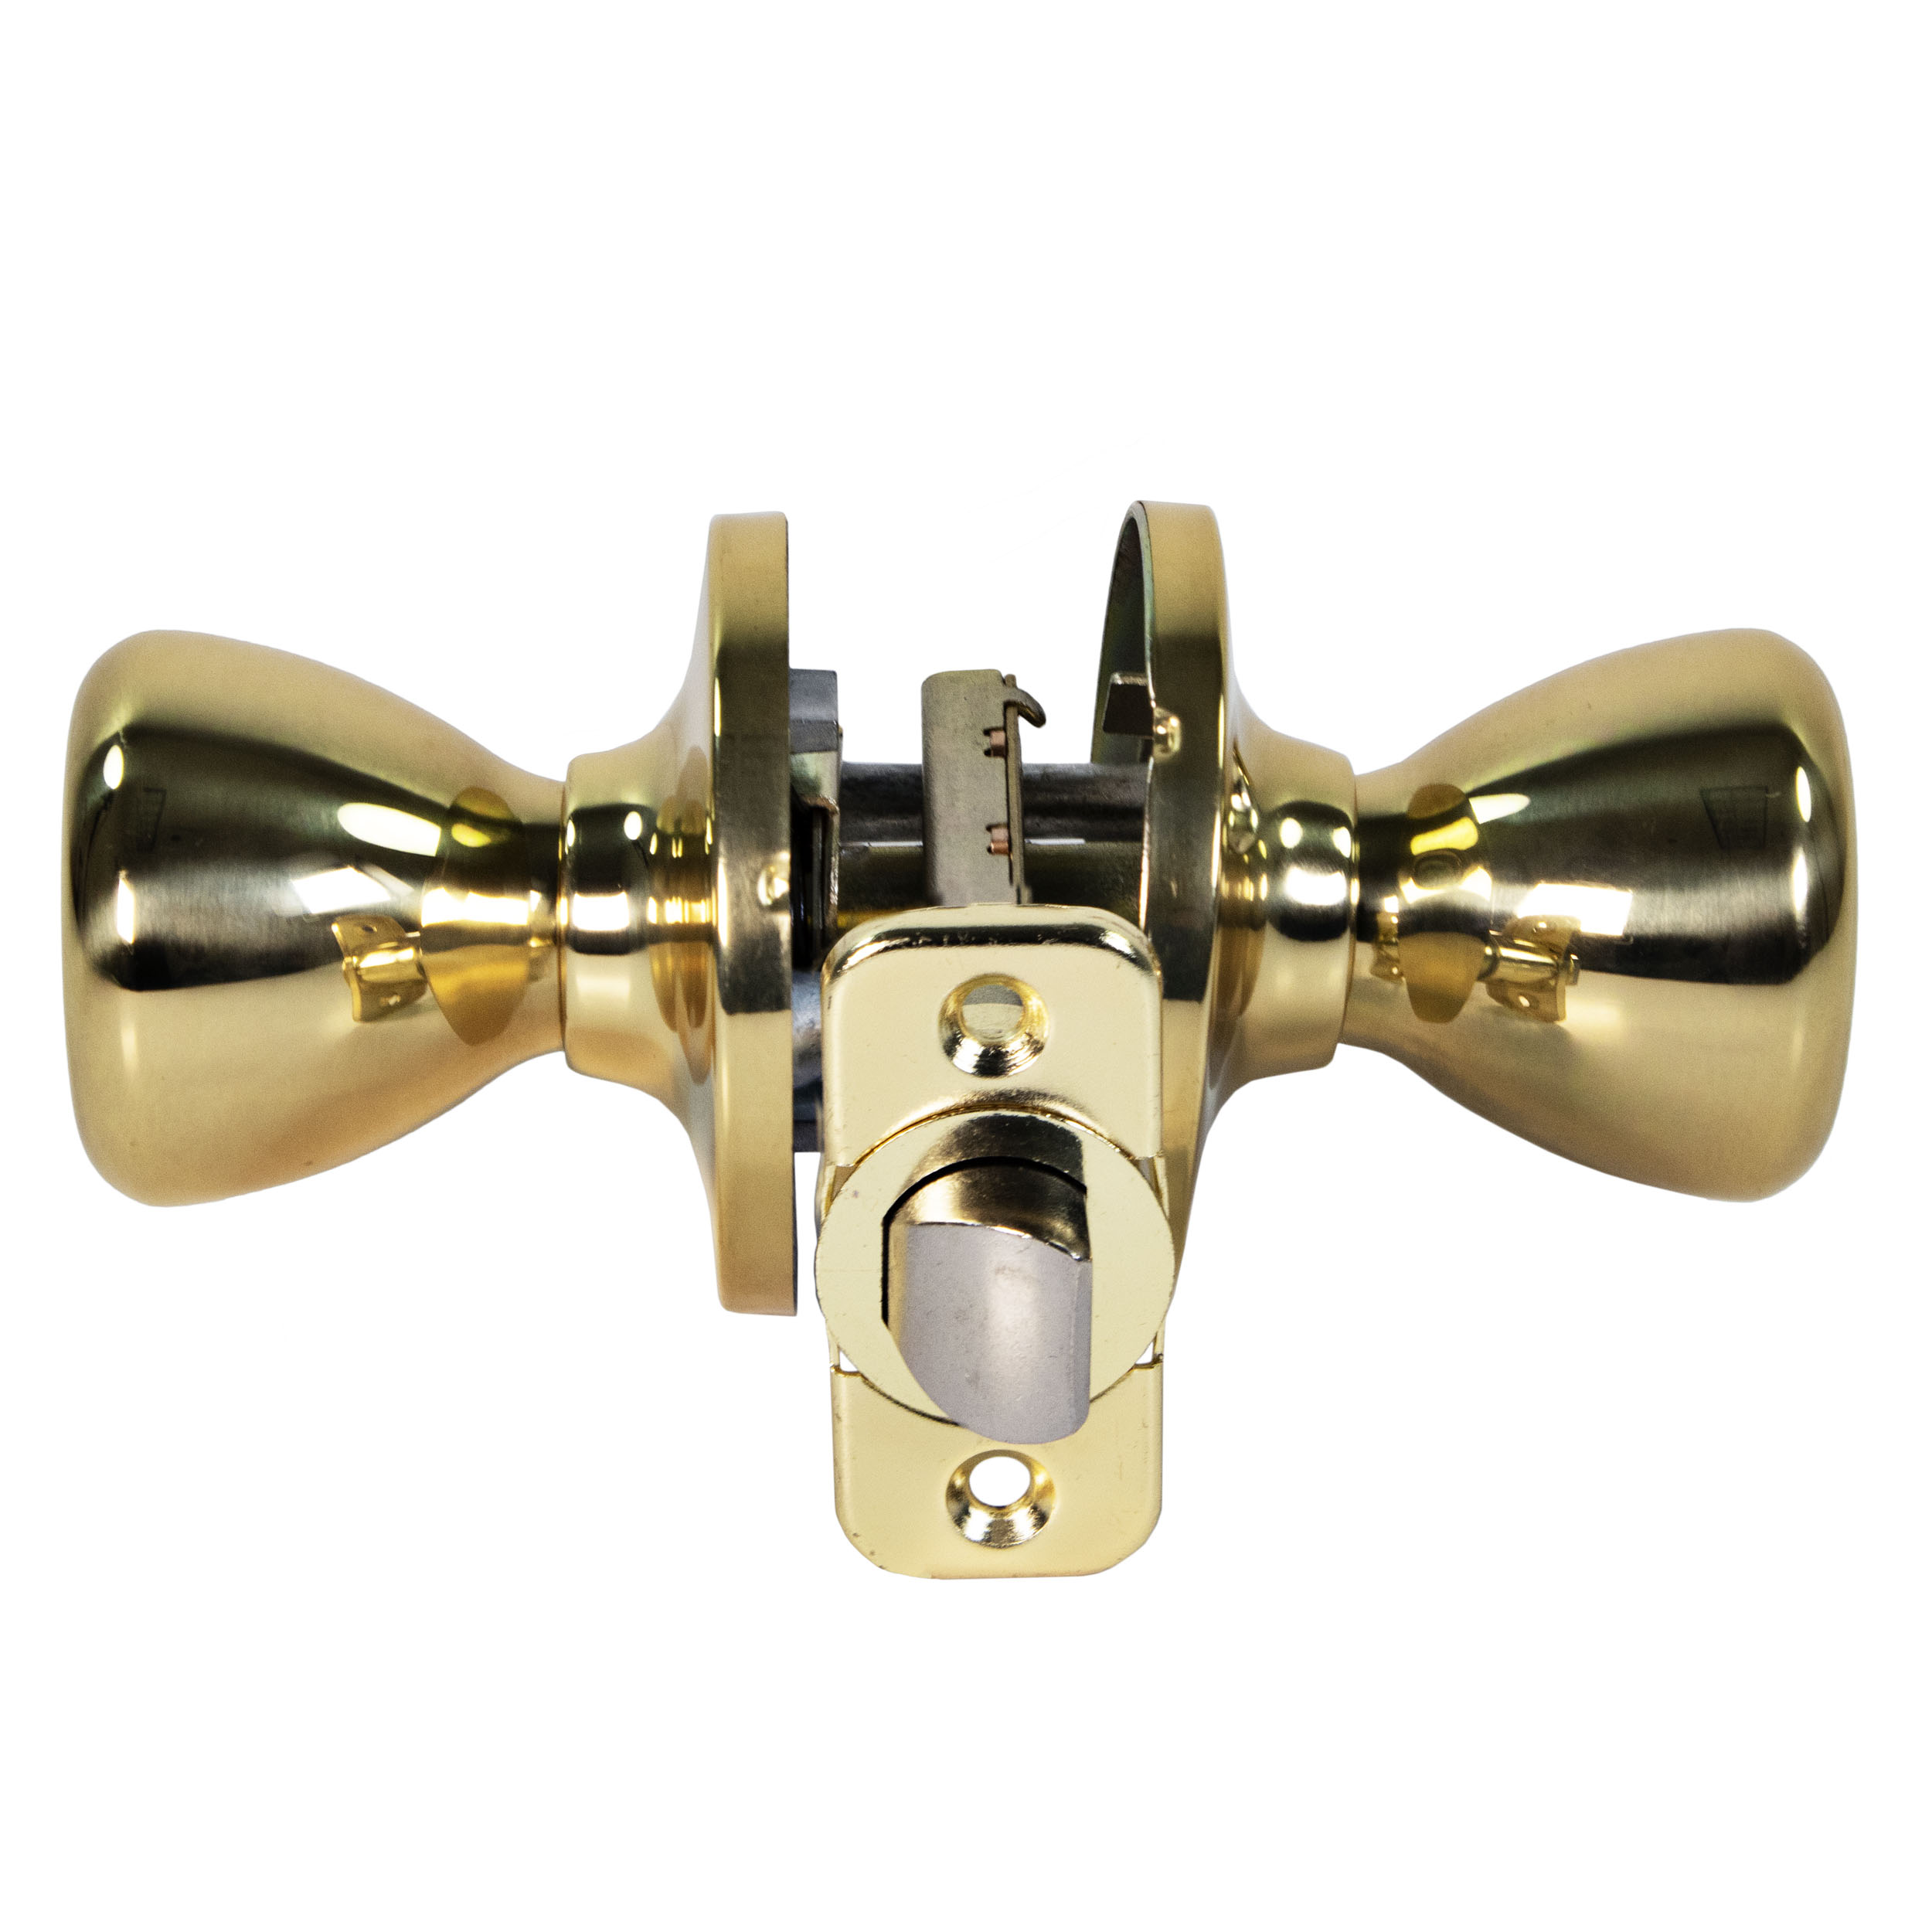 Ultra Security Rittenhouse Hall and Closet Lockset - Door Knob Hall and Closet Passage Non-Lockable Lockset, Fits 1-3/8 Inch to 1-3/4 Inch Door Thickness (Polished Brass Finish, 1 Pack) - image 5 of 11